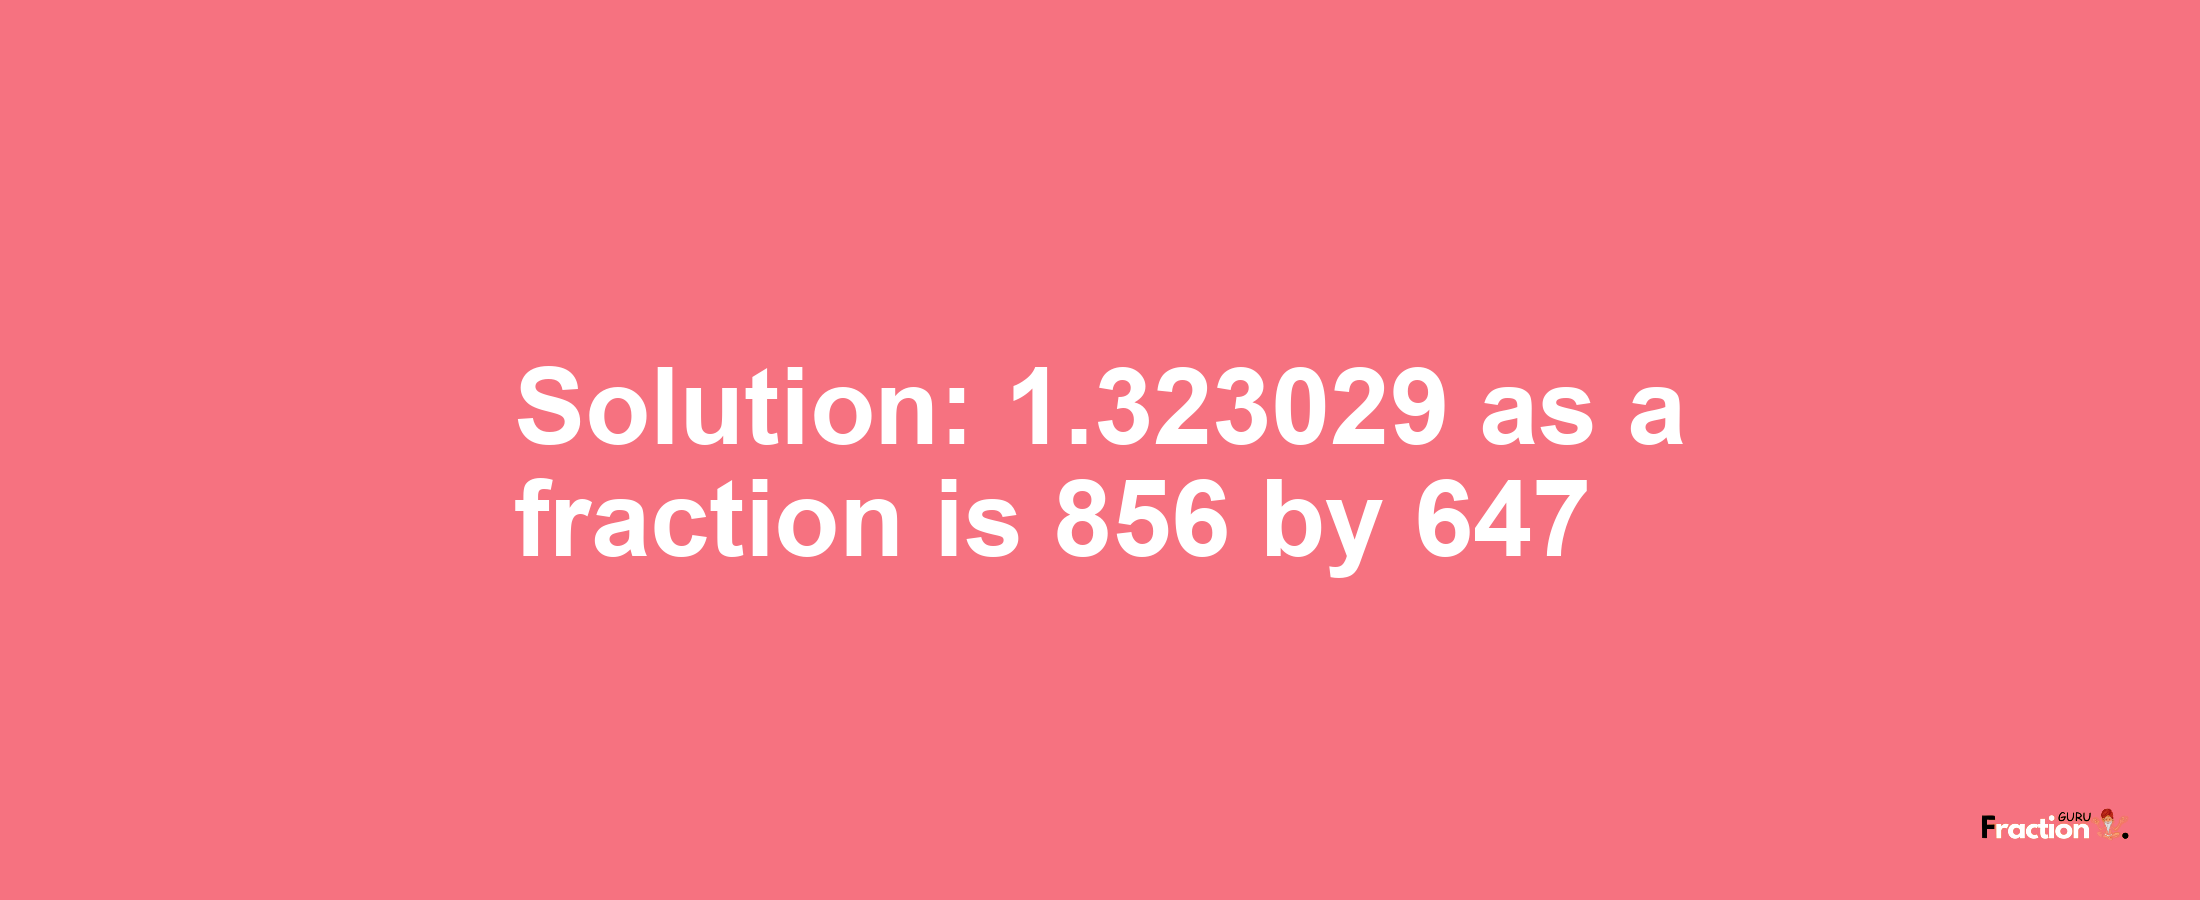 Solution:1.323029 as a fraction is 856/647